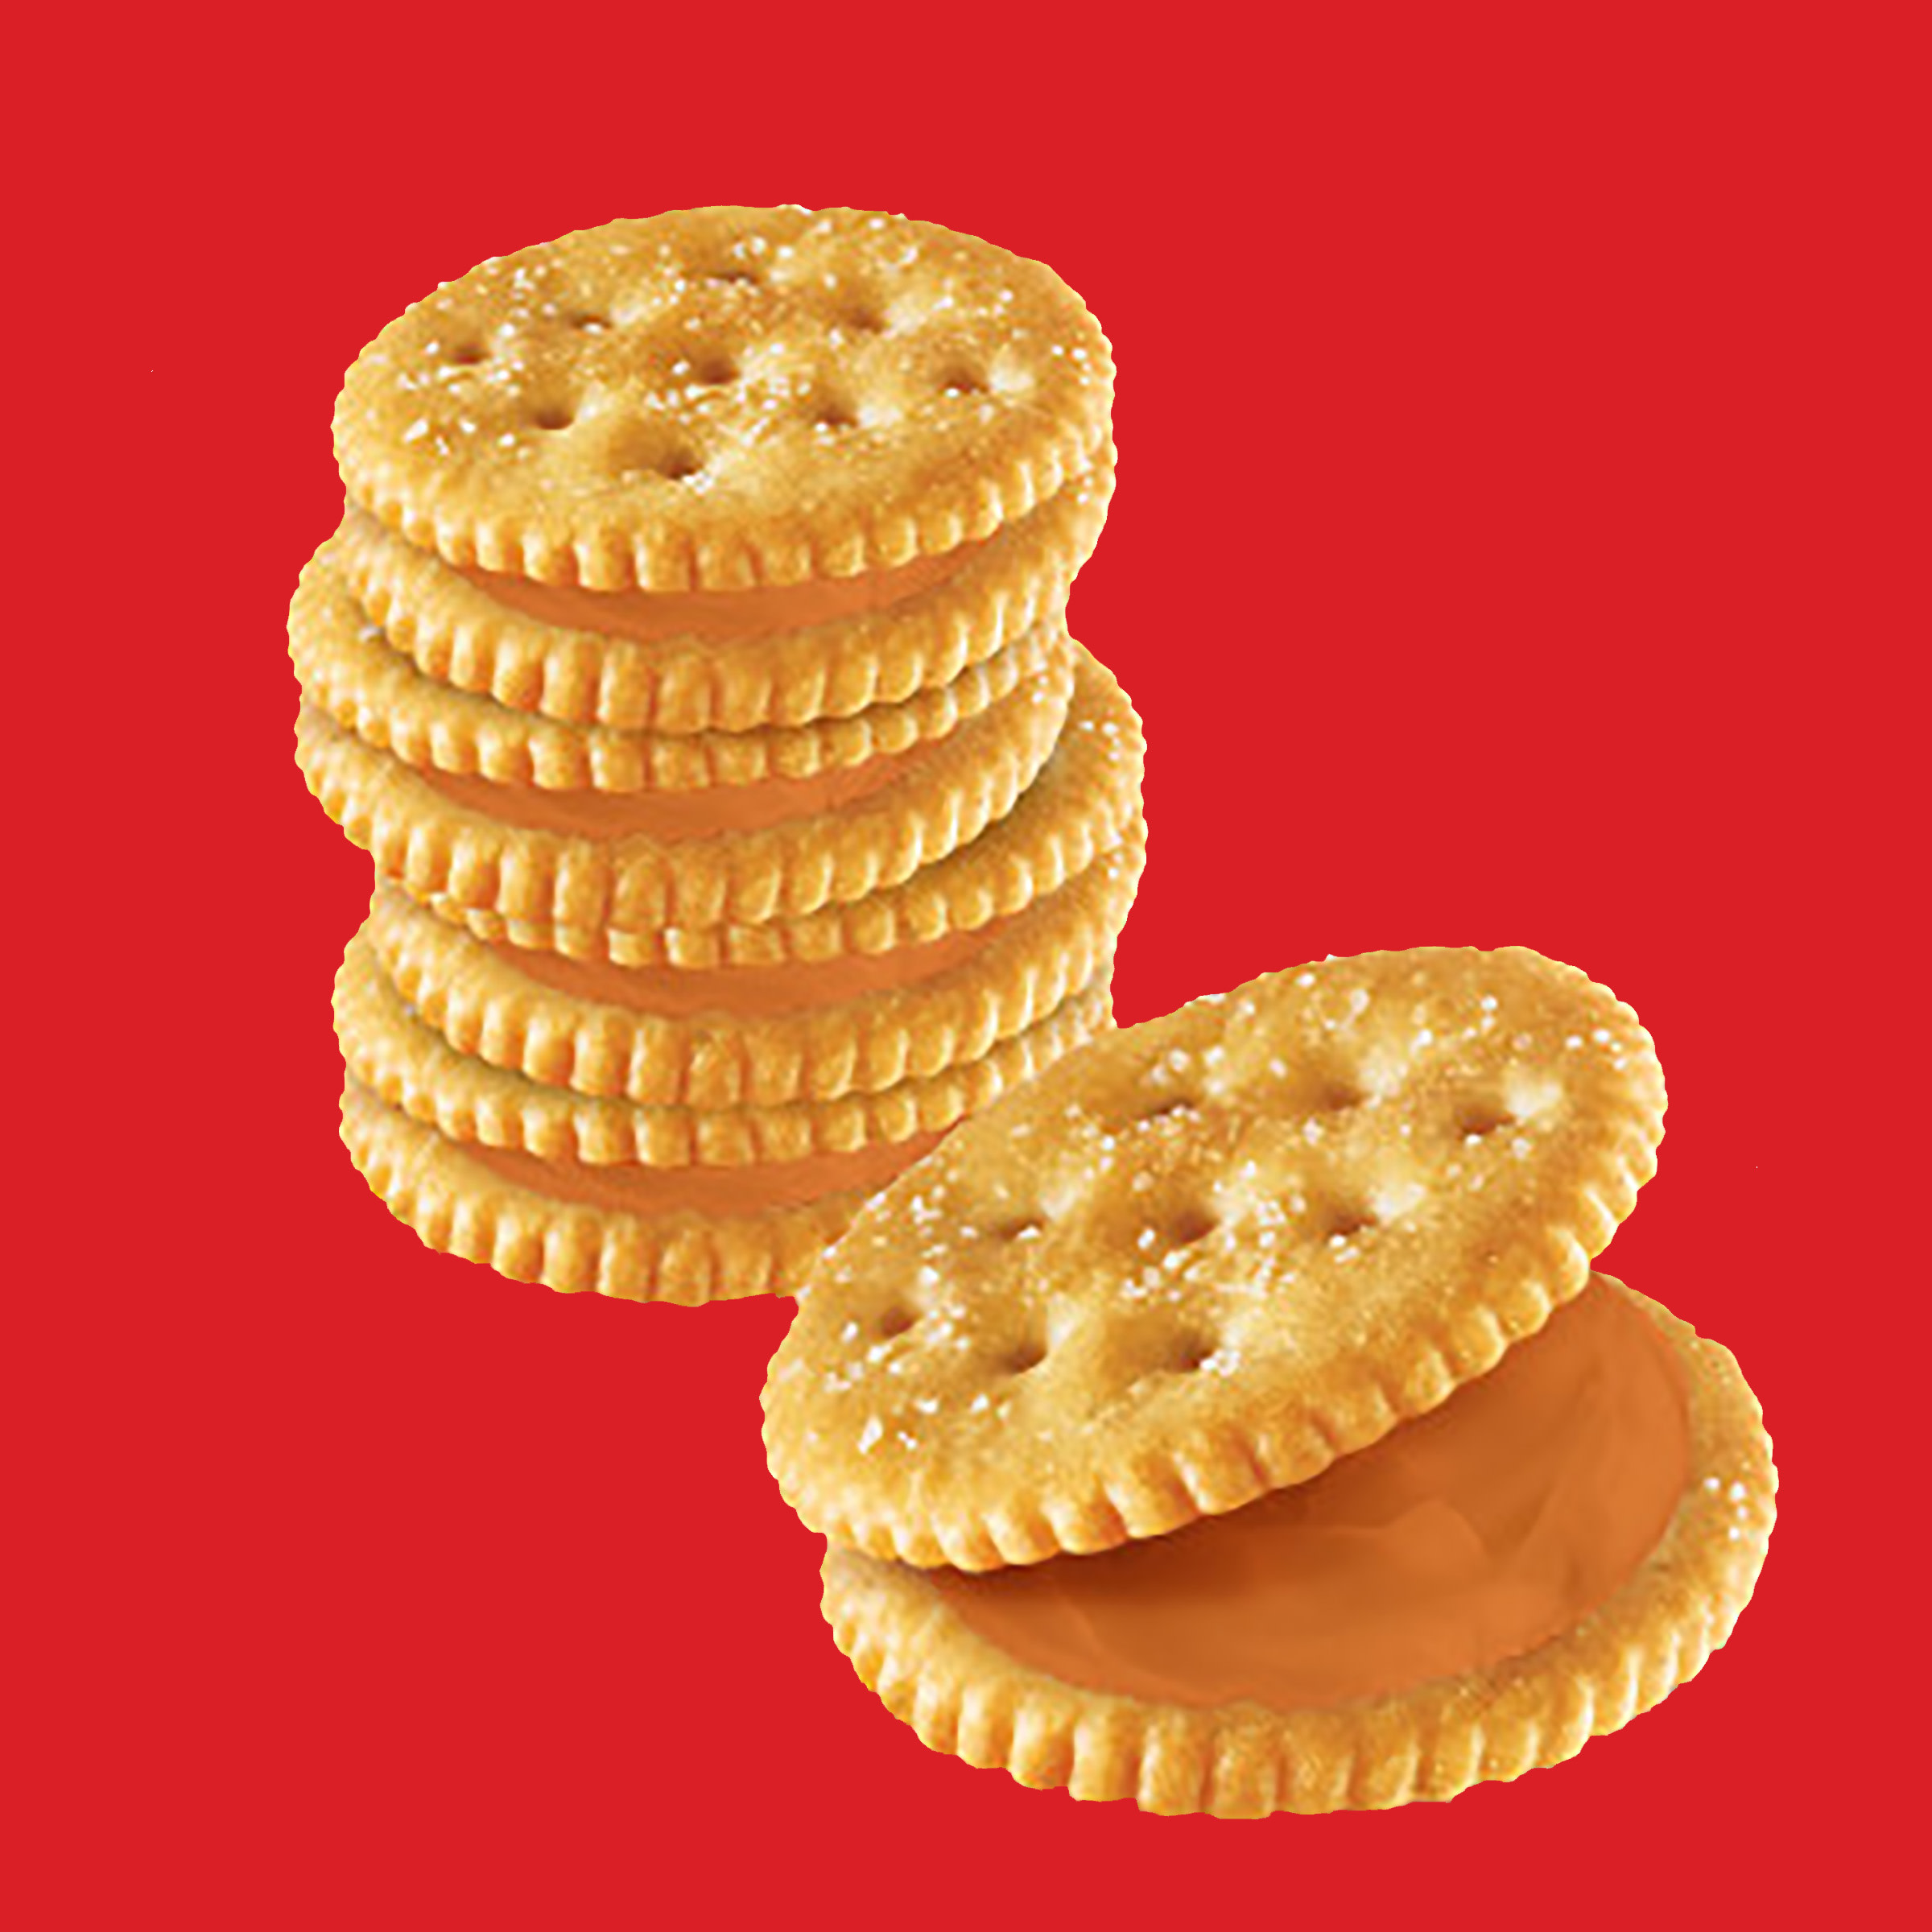 RITZ Peanut Butter Sandwich Crackers, Family Size, 16 - 1.38 oz Packs - image 3 of 13